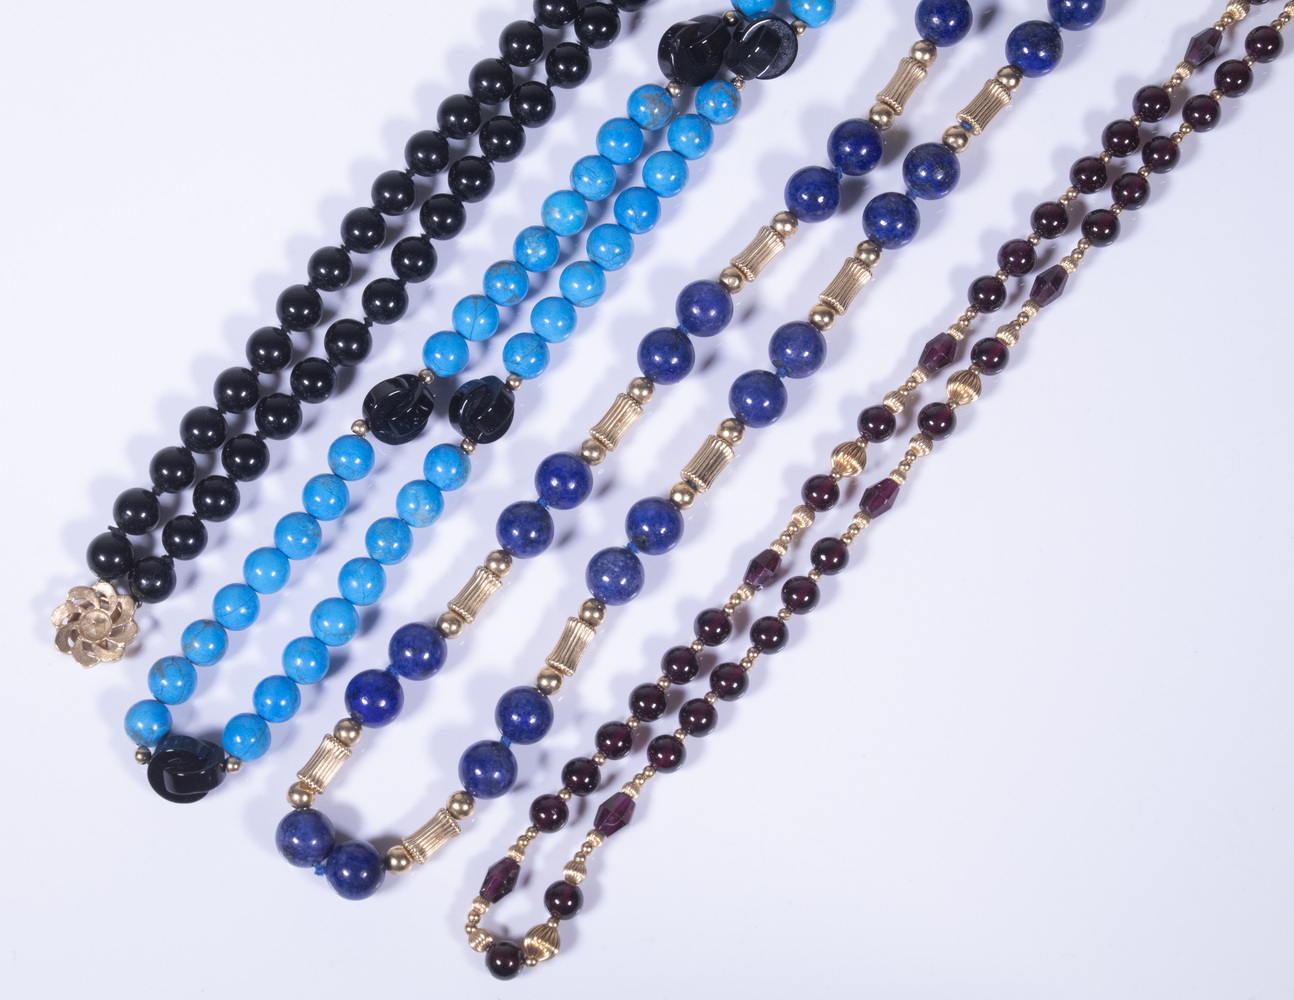 POLISHED STONE & GOLD BEAD NECKLACES